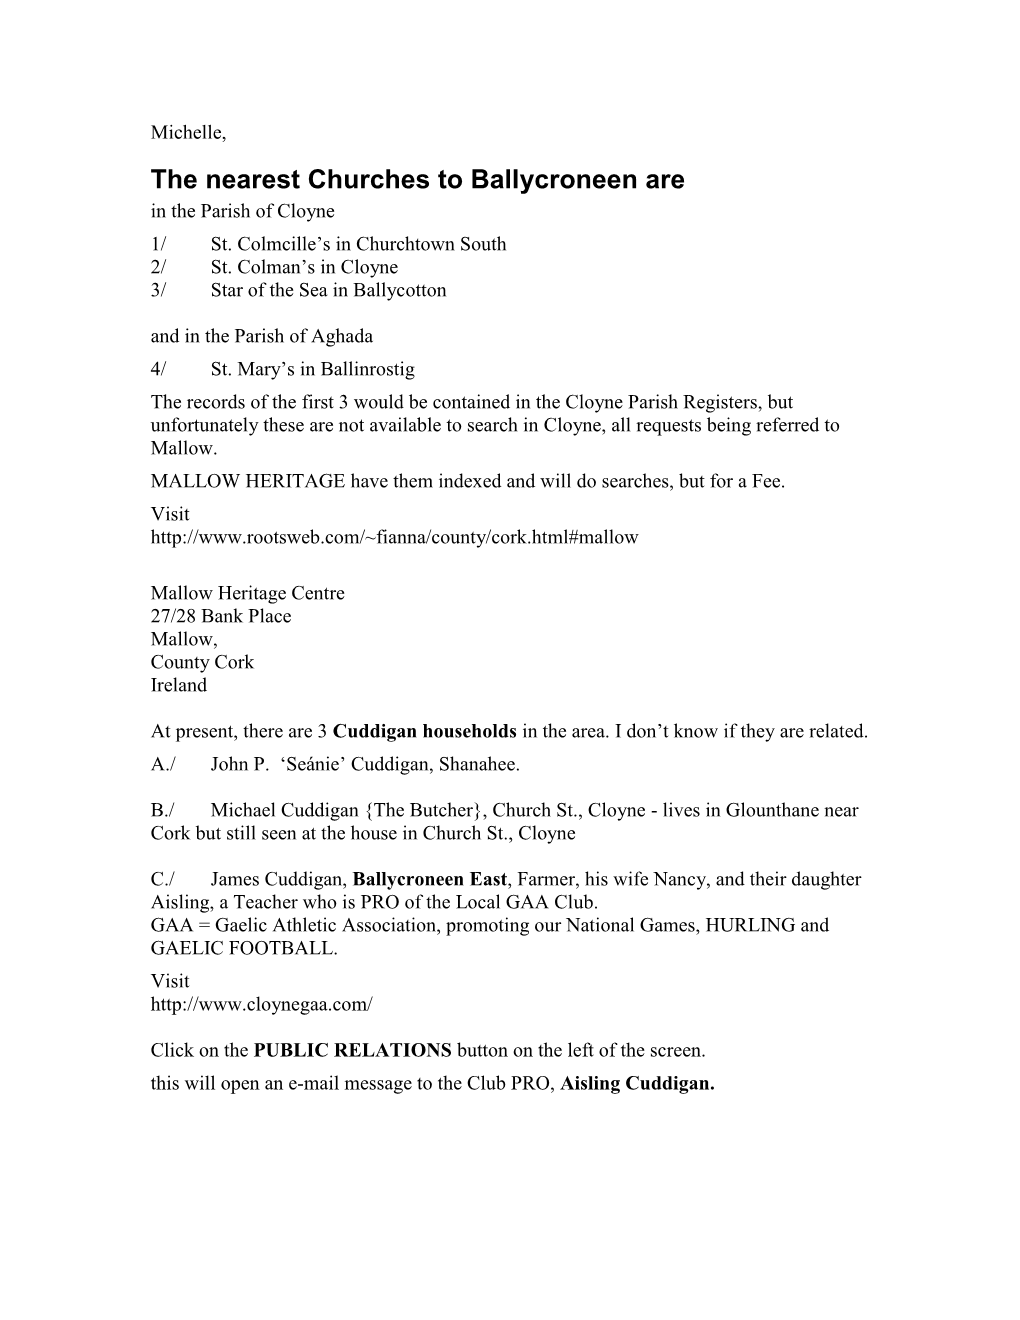 The Nearest Churches to Ballycroneen Are in the Parish of Cloyne 1/ St